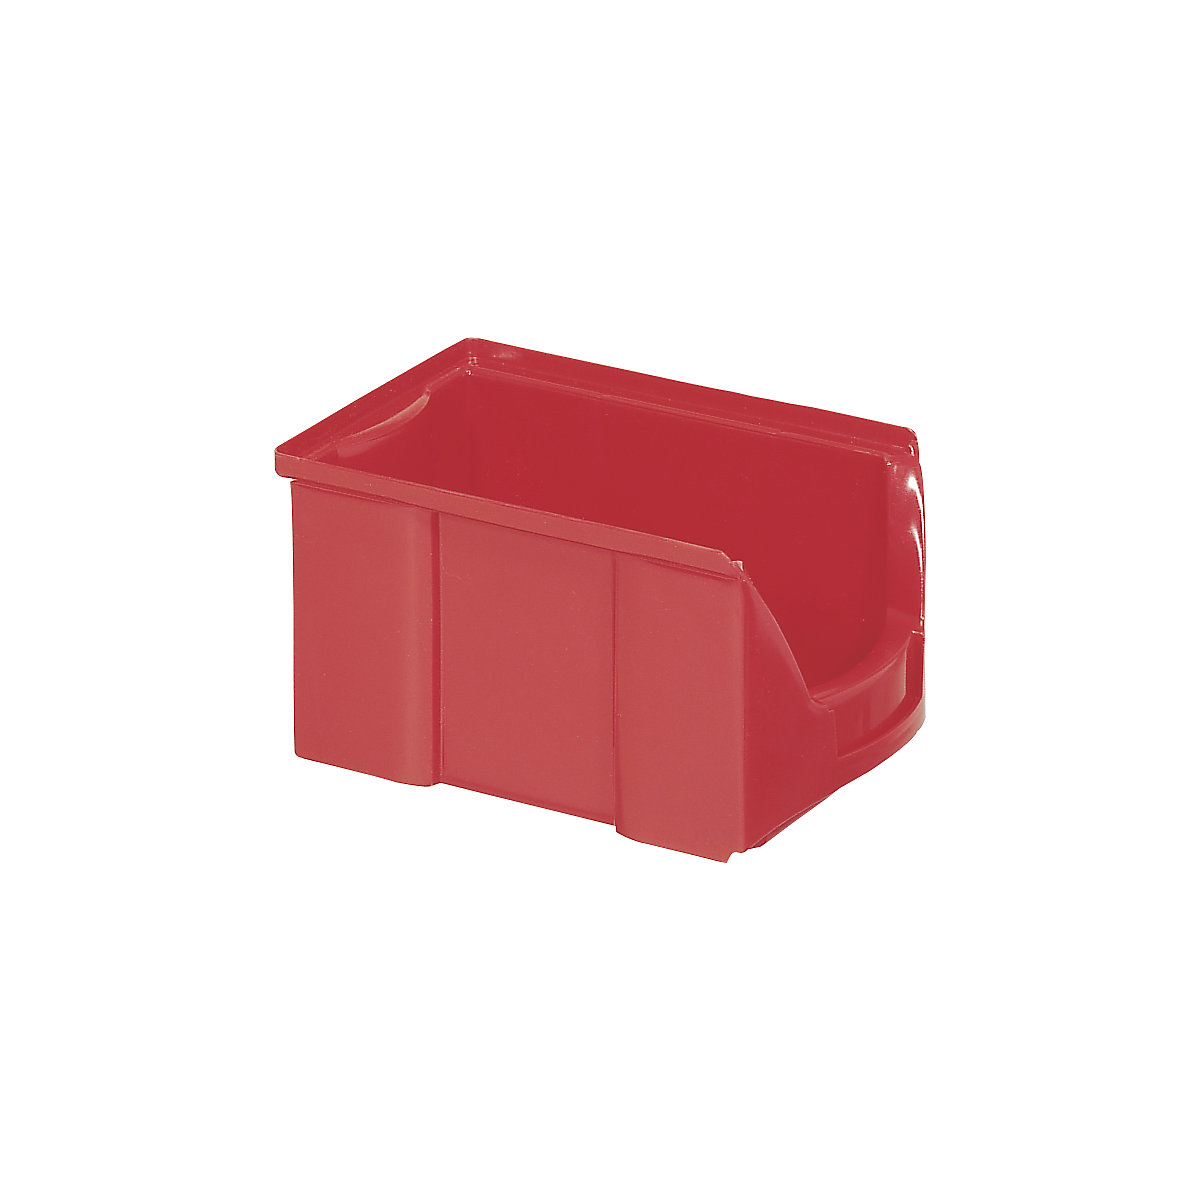 FUTURA open fronted storage bin made of polyethylene, LxWxH 229 x 148 x 122 mm, pack of 25, red-17